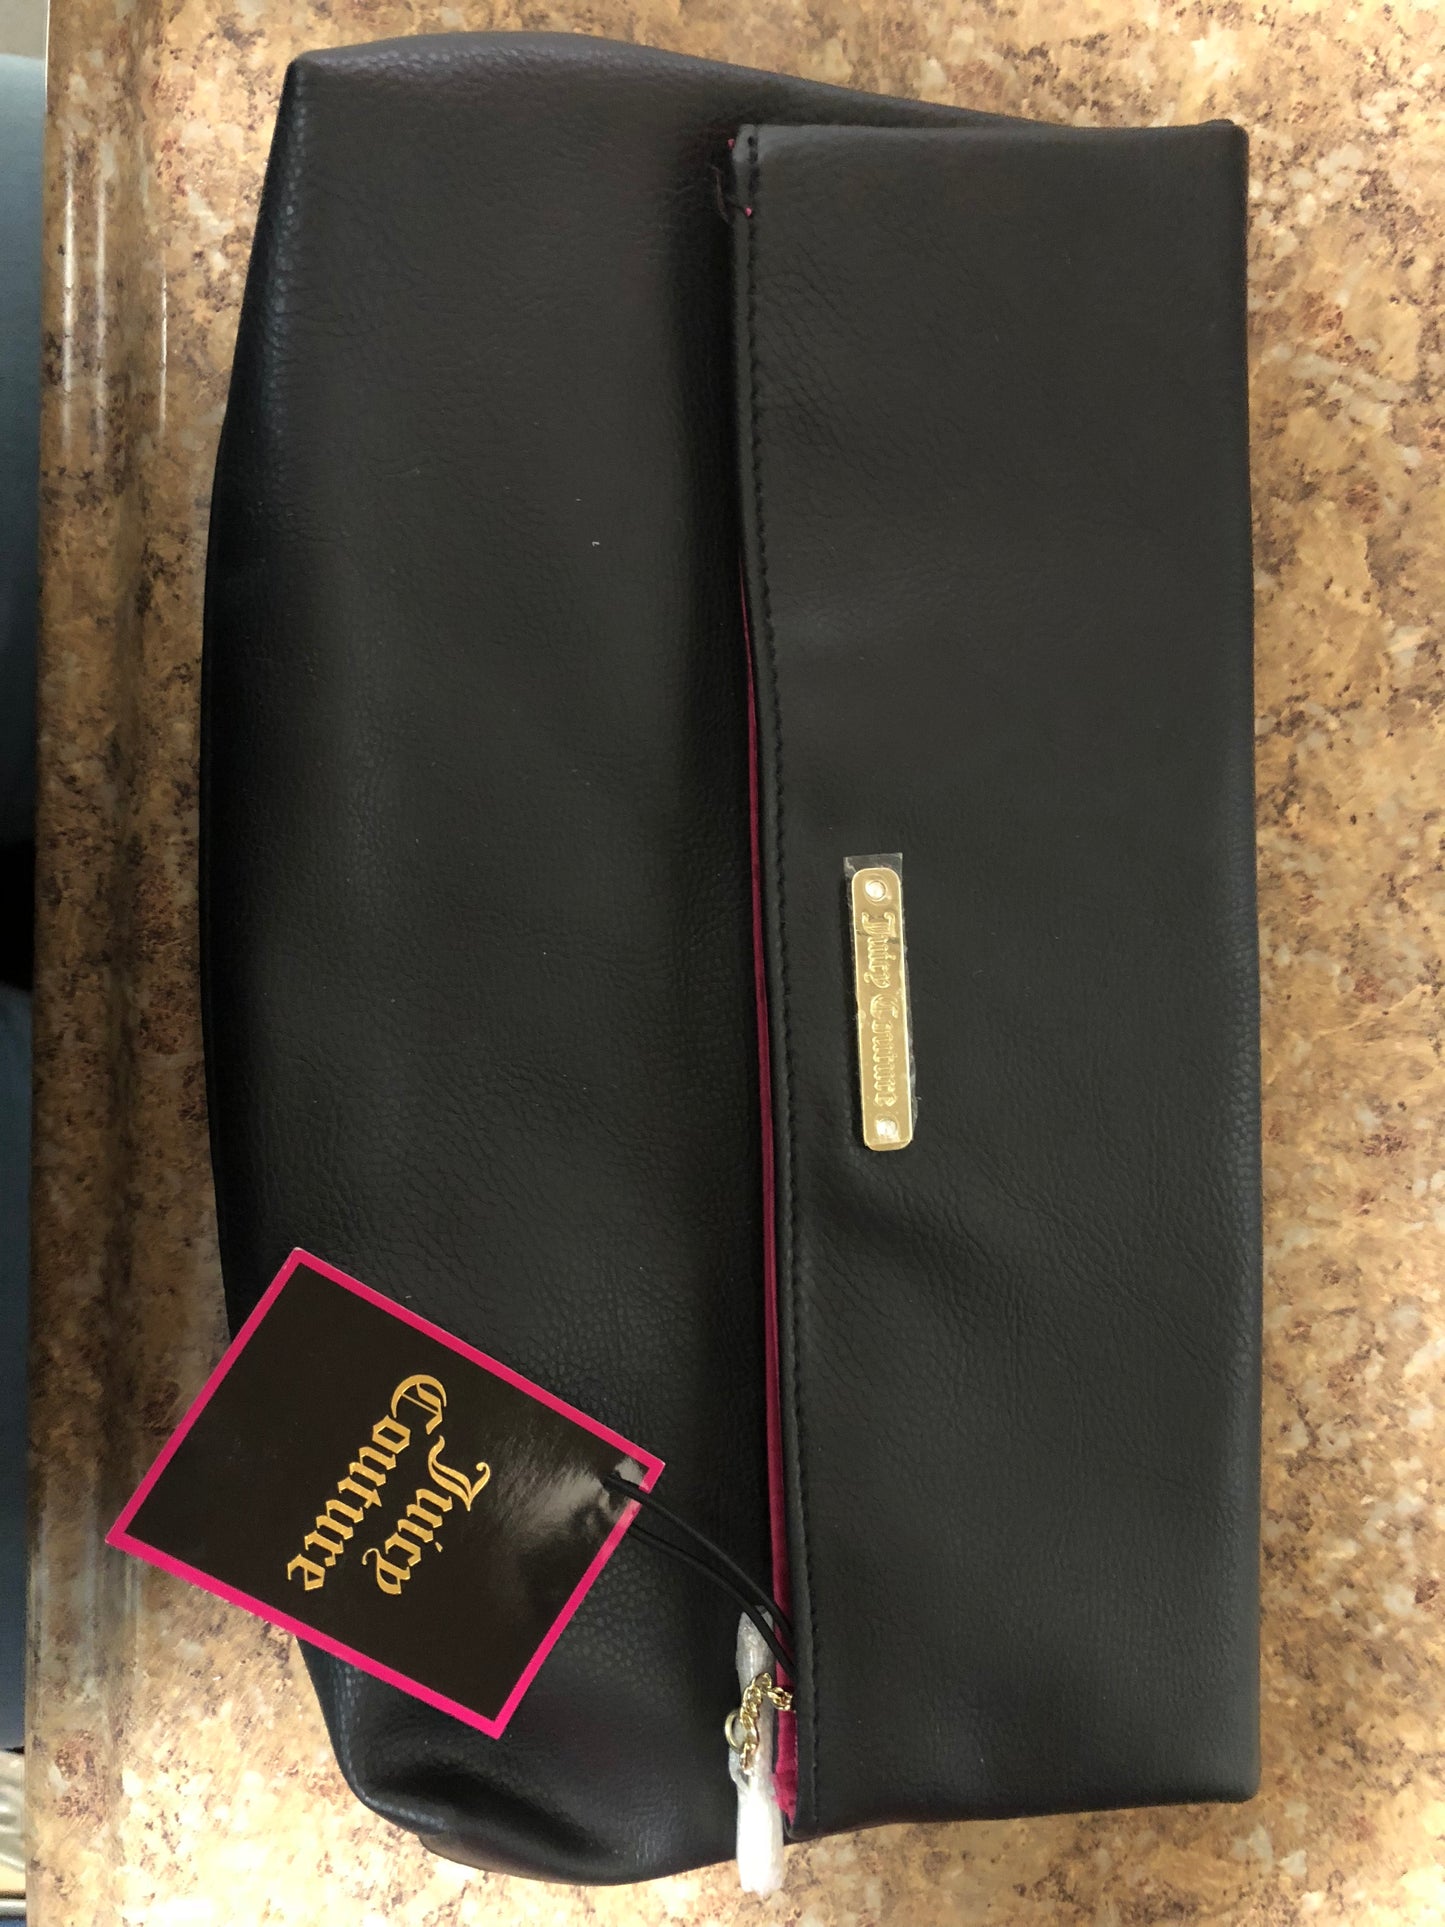 Juicy couture clutch